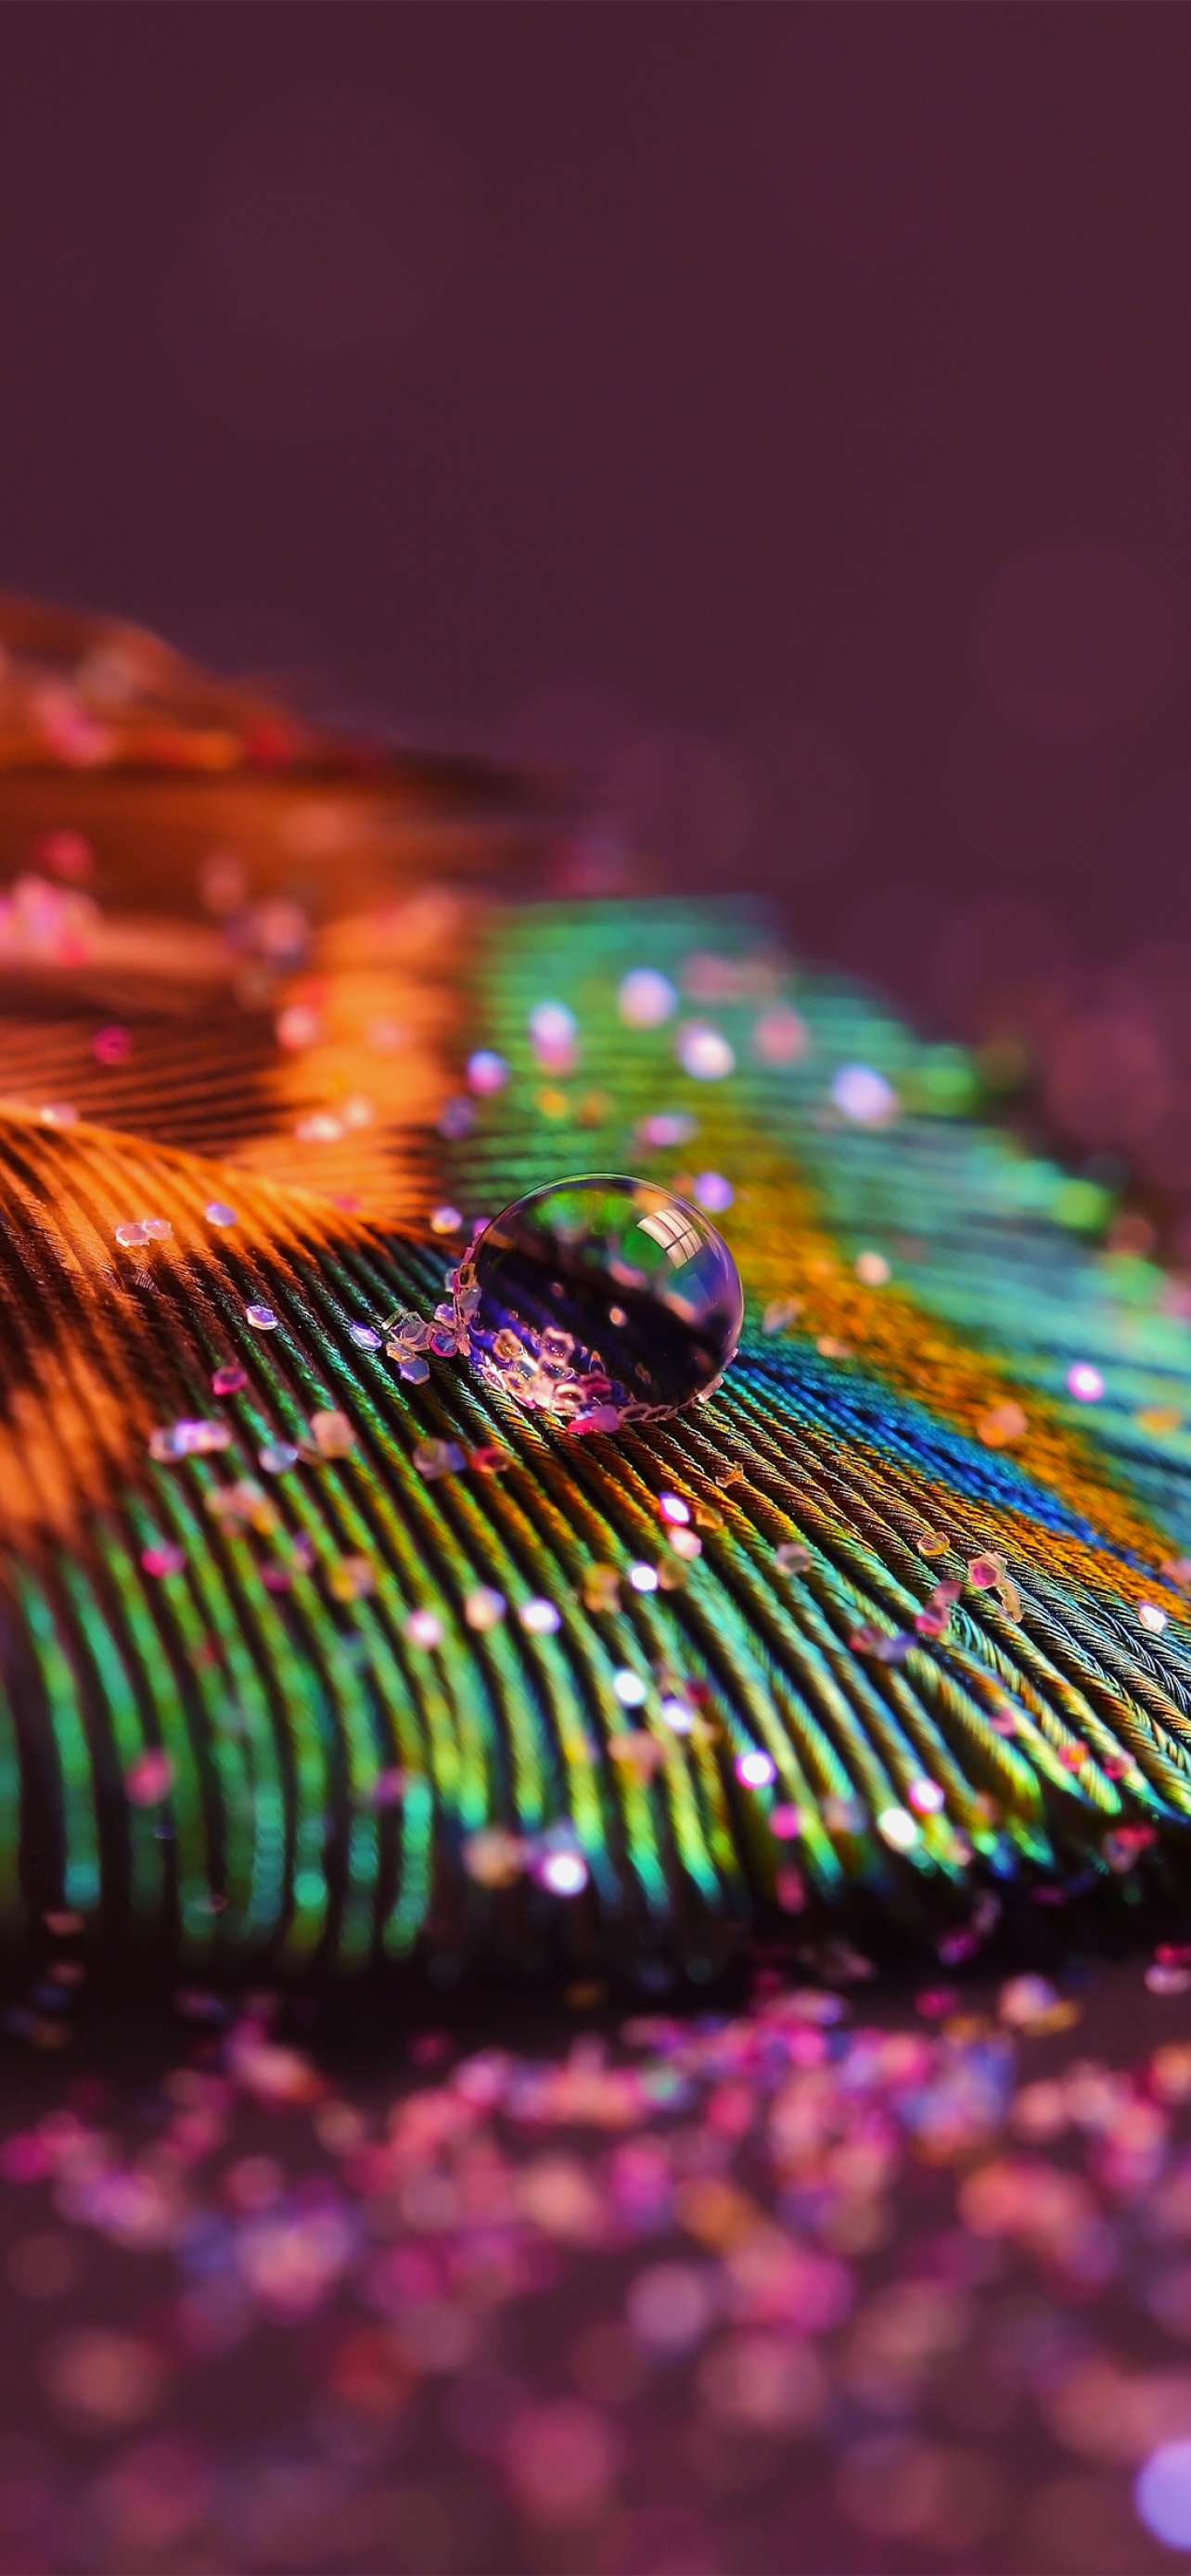 HD wallpaper: peacock feather, feathers, abstract, multi colored, studio  shot | Wallpaper Flare